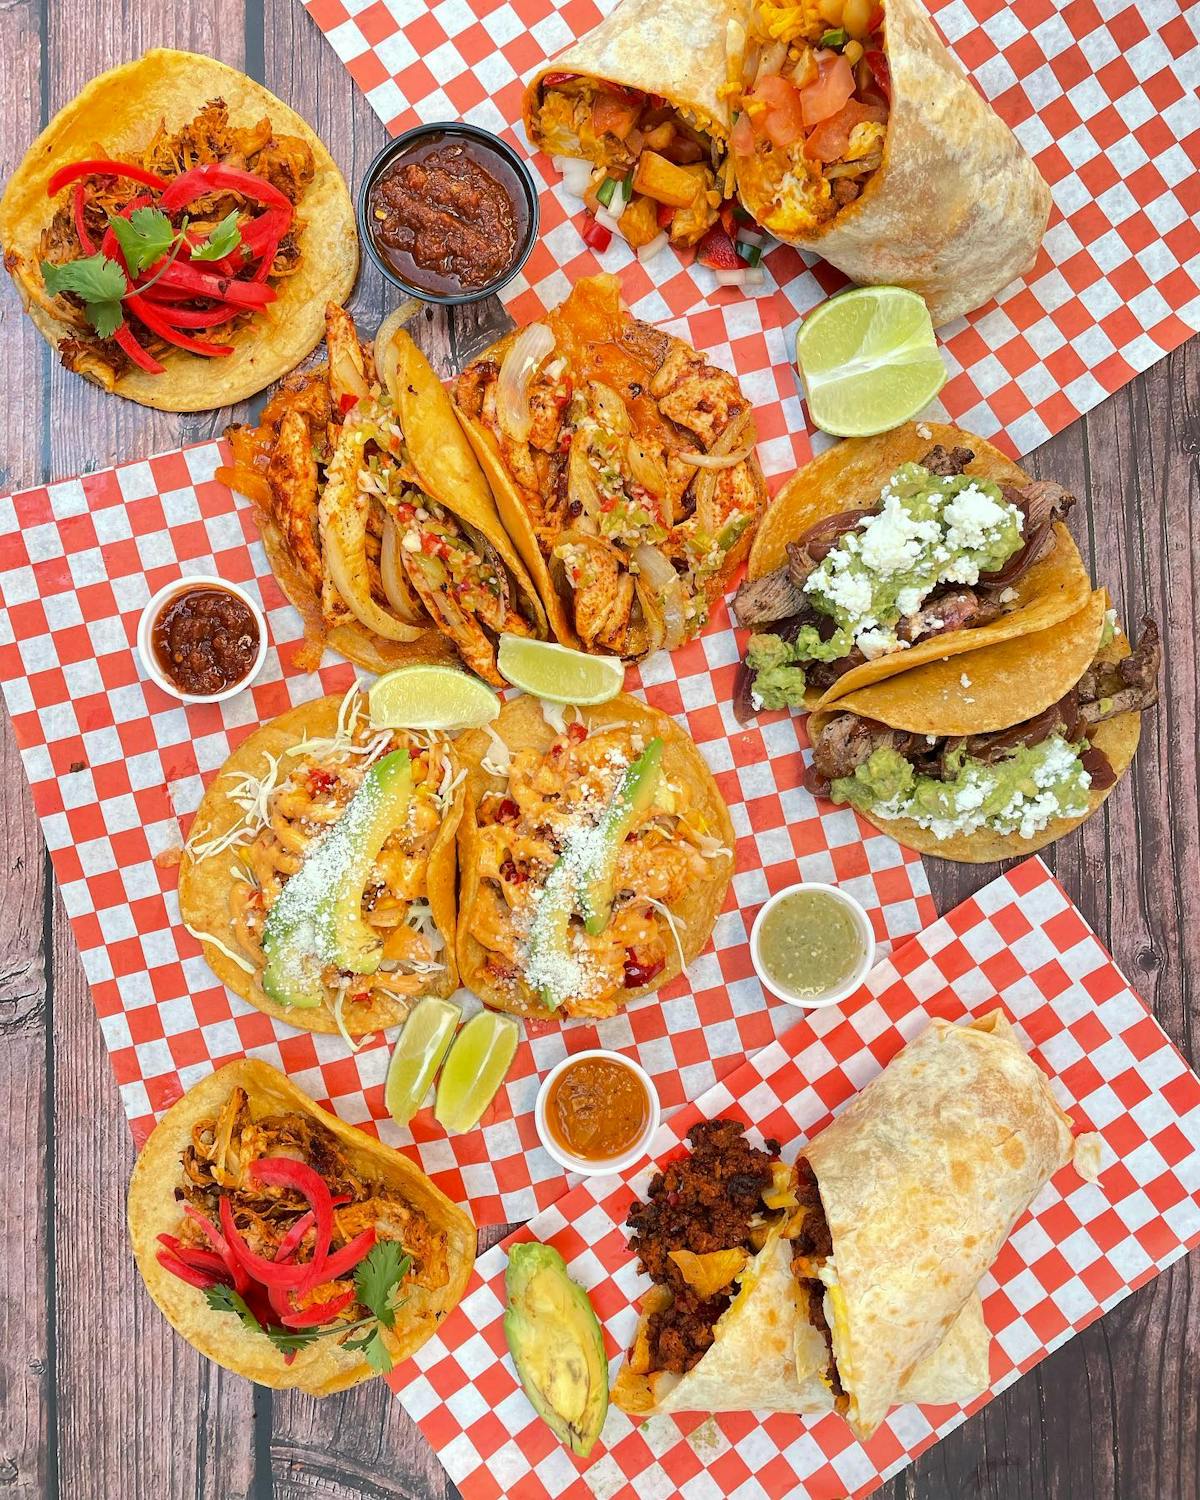 a photo of different foods that includes tacos, burritos with salsas and slices of lime